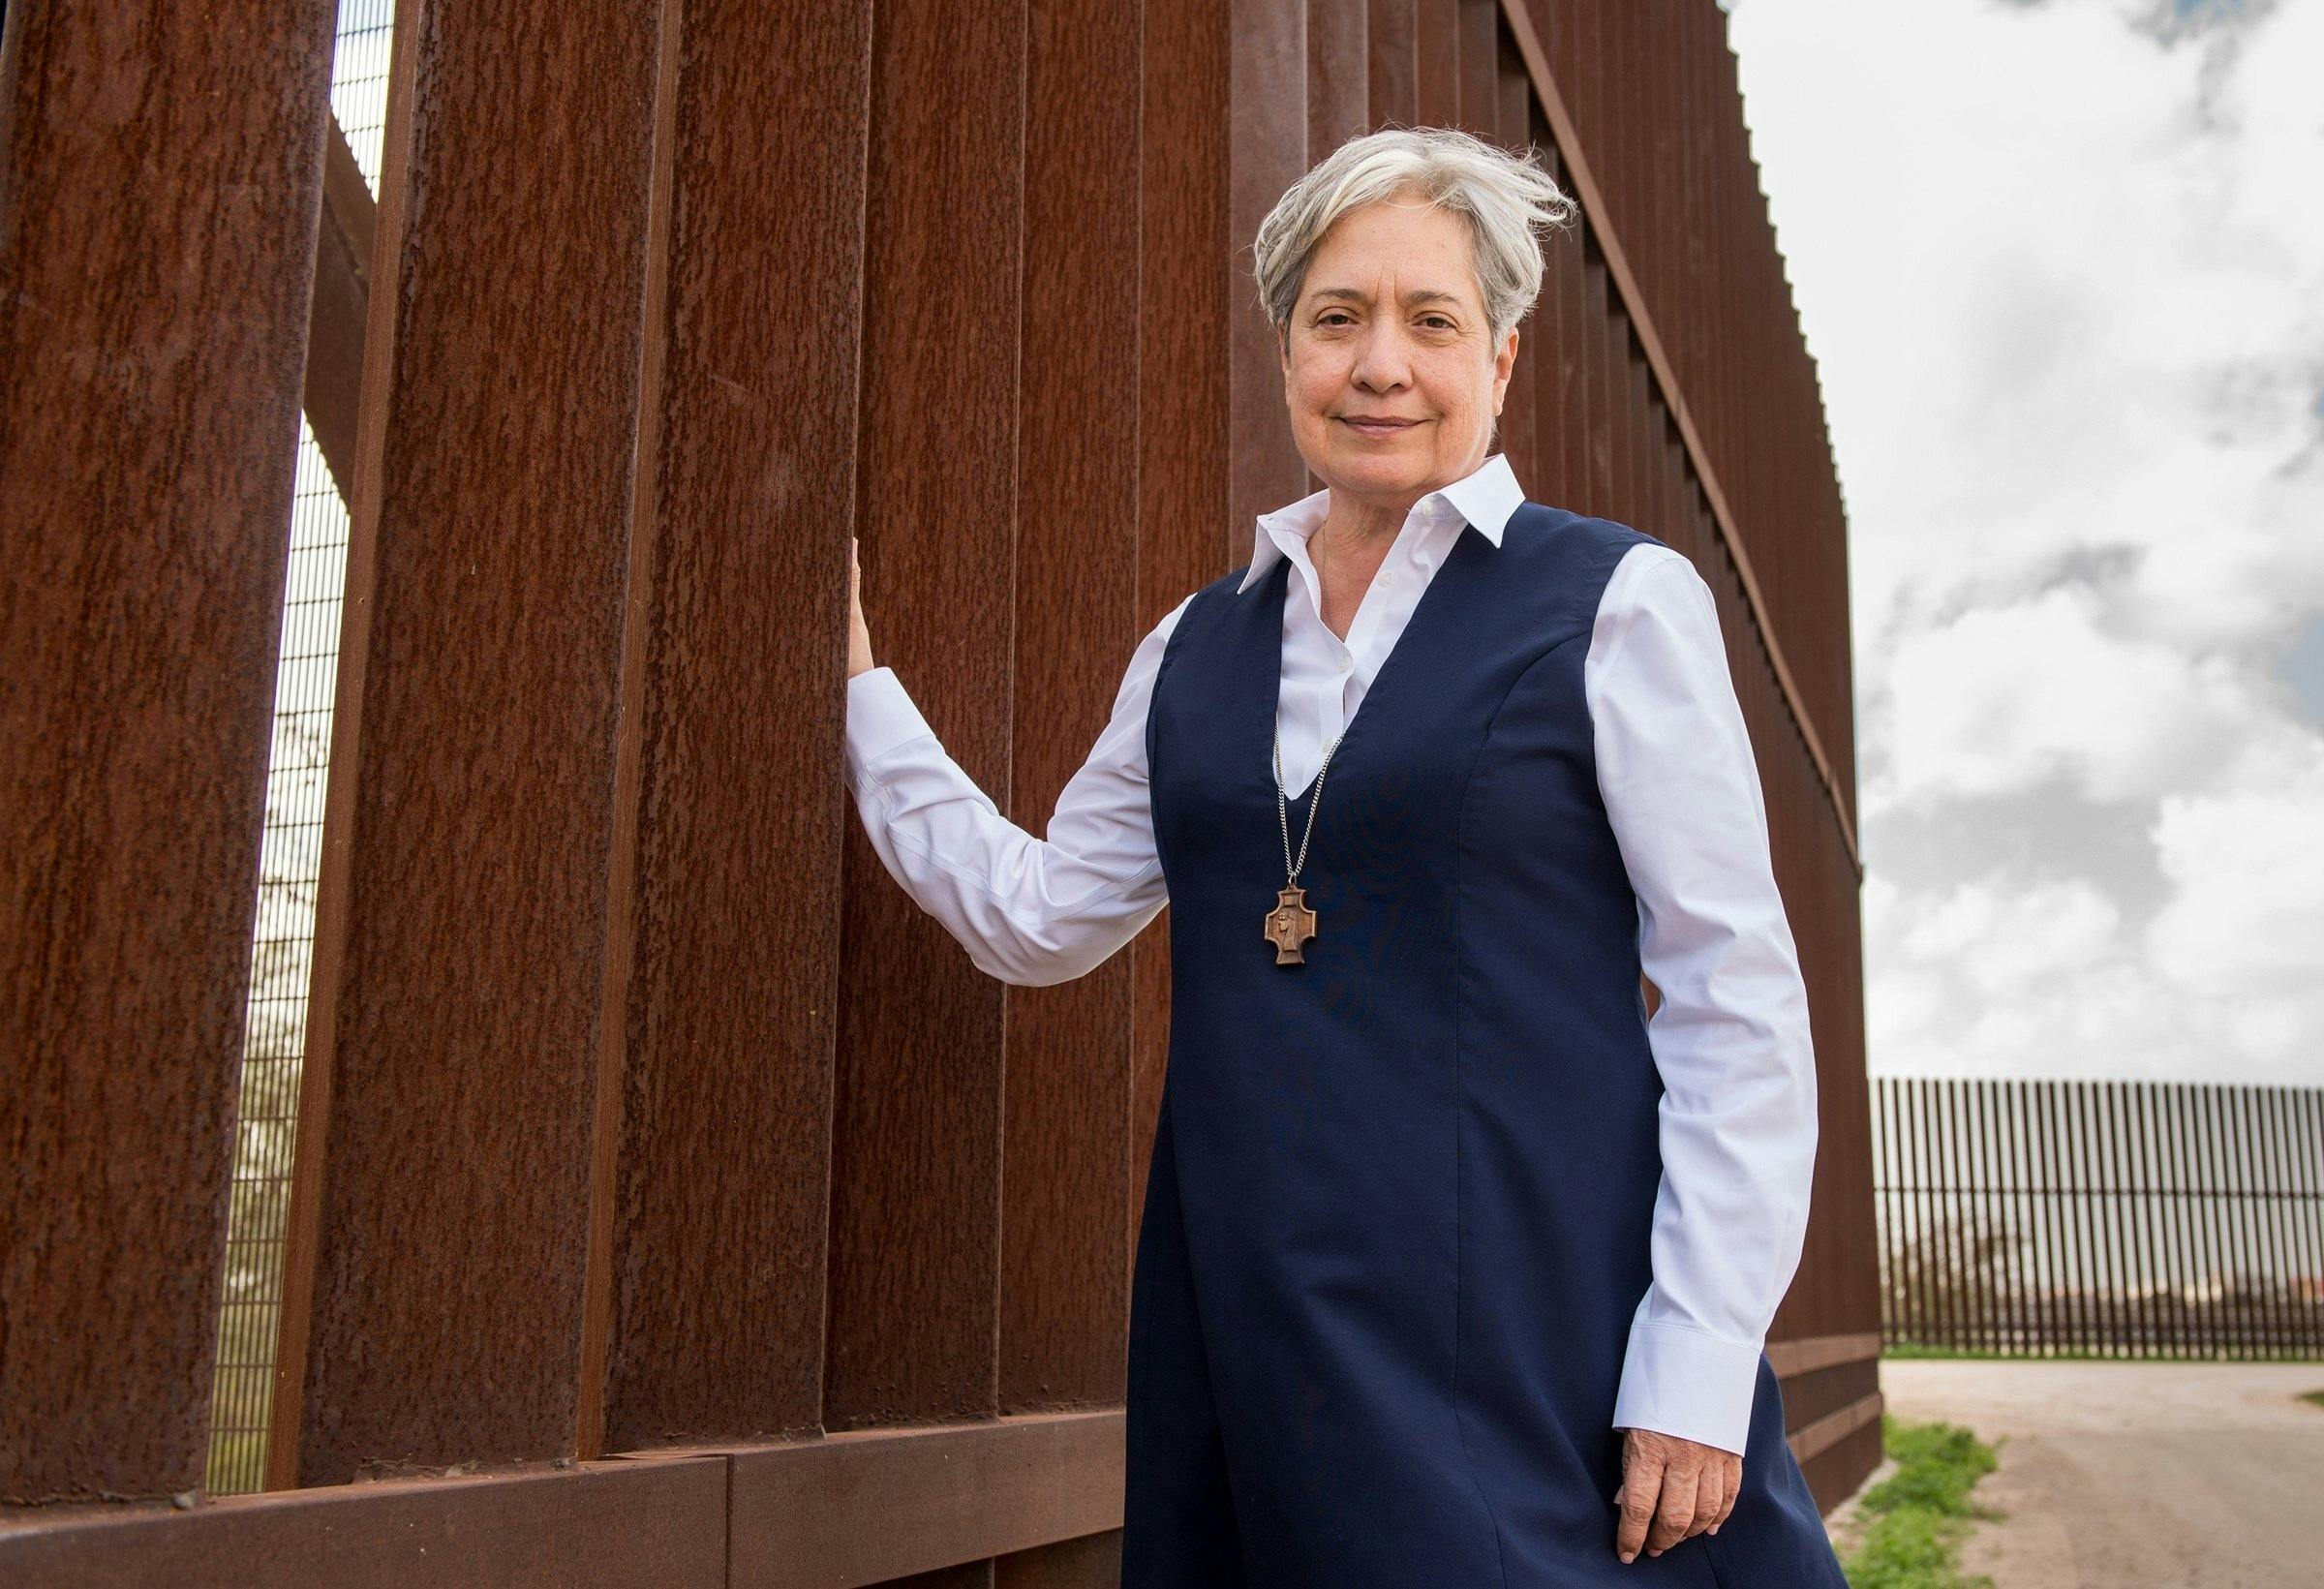 Sr. Norma Pimentel, a member of the Missionaries of Jesus, is pictured along a border wall between Texas and Mexico in late February 2018. As the executive director of Catholic Charities of the Rio Grande Valley in Brownsville, Texas, Sr. Pimentel has become a national symbol of the peacekeeping to which Christians are called in the refugee crisis. (CNS photo/Barbara Johnston, courtesy University of Notre Dame)